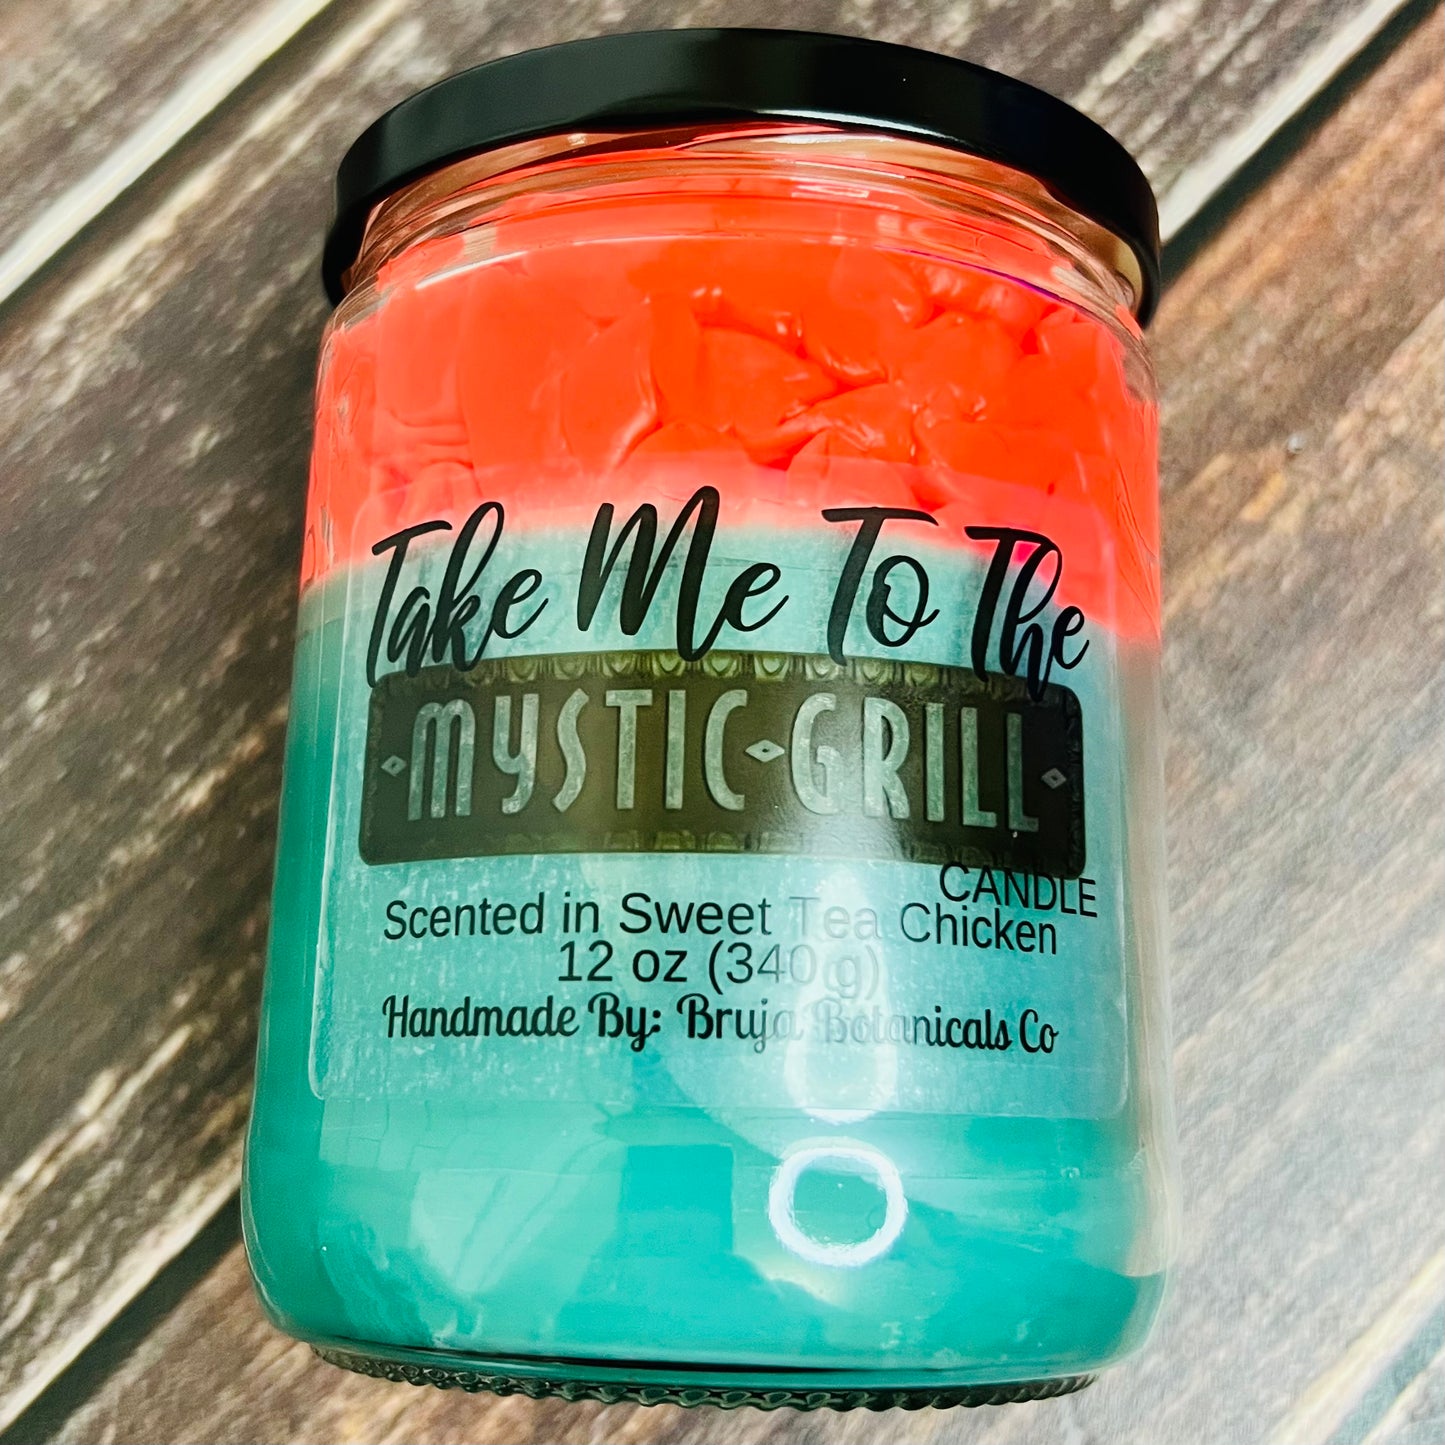 Take Me to the Mystic Grill Whipped Candle (TVD inspired)